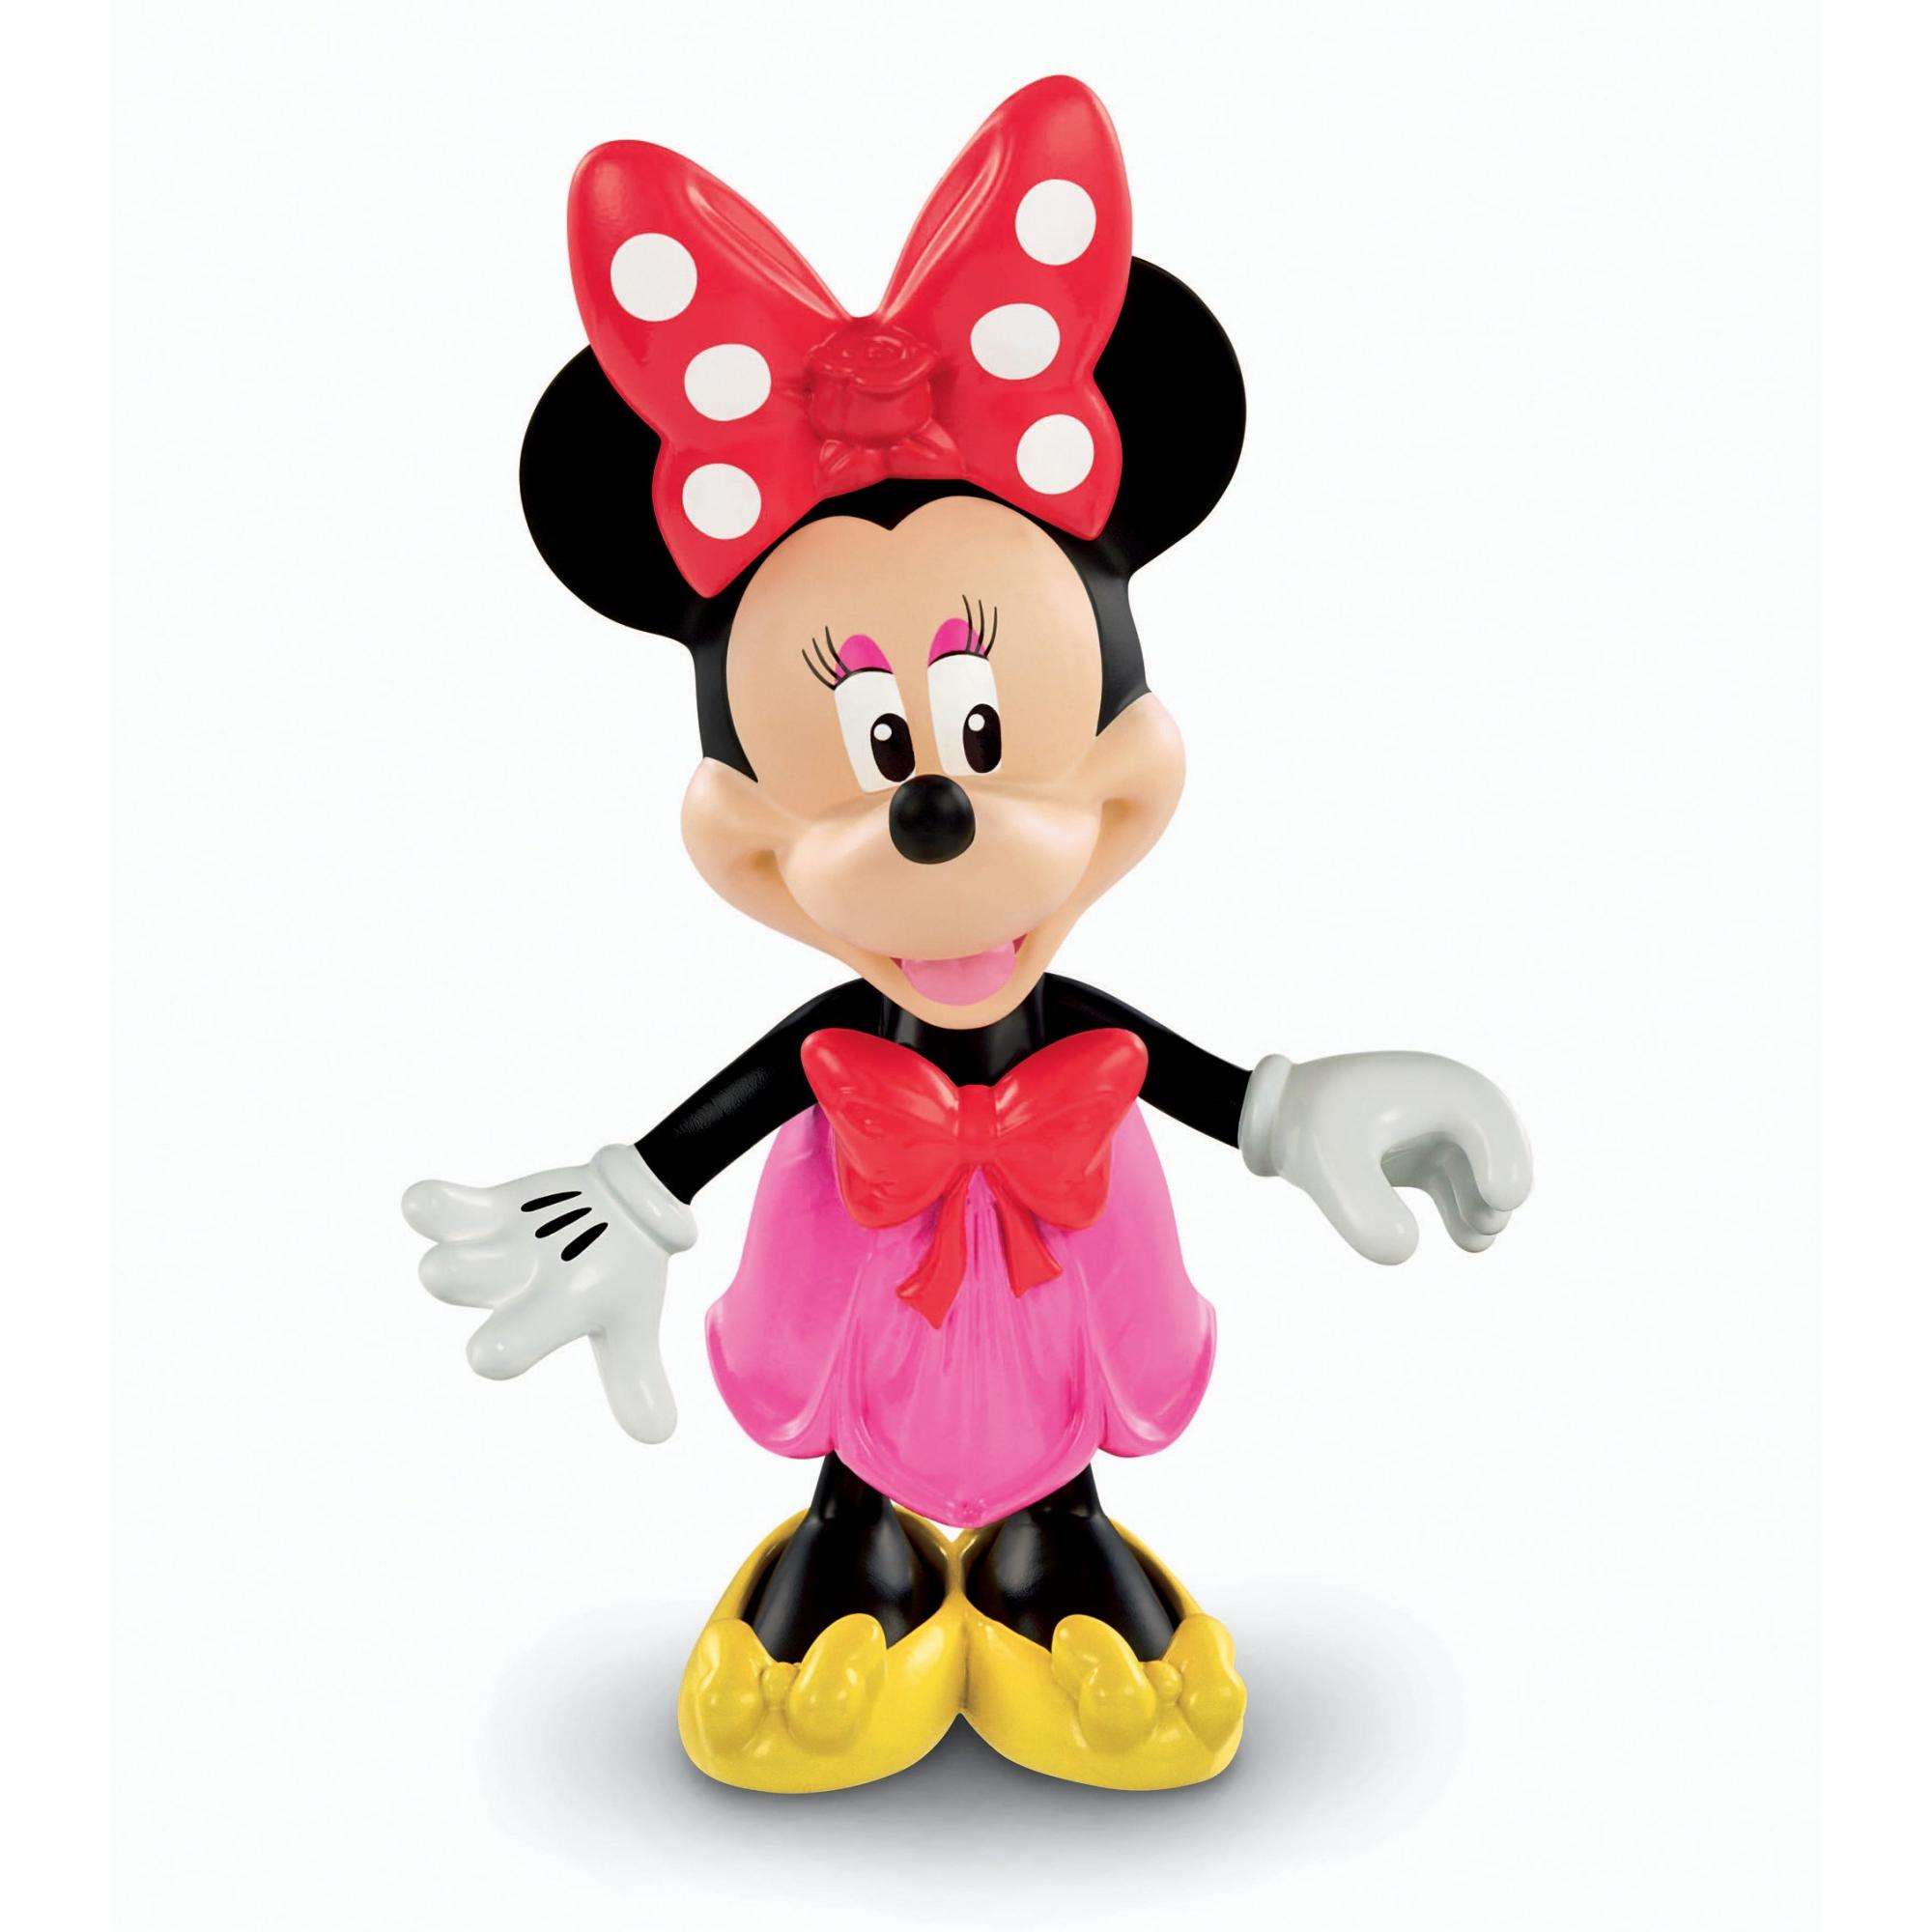 Fisher-Price Disney Minnie Mouse Flower Garden Bow-Tique Playset - image 2 of 4